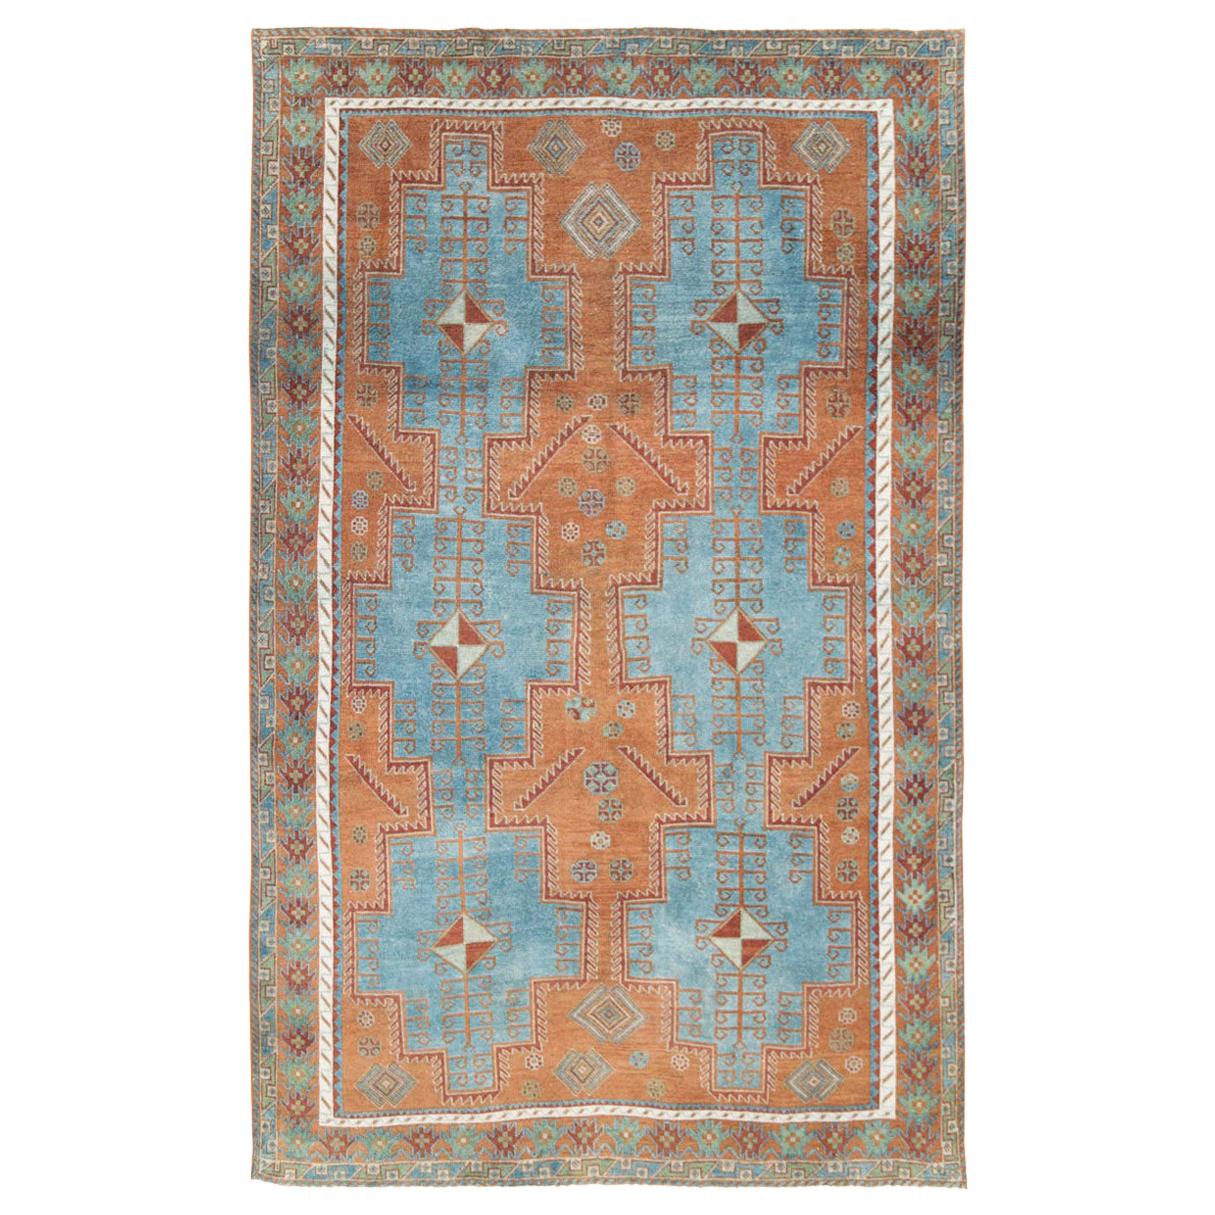 Mid-20th Century Handmade Persian Tribal Accent Rug in Orange, Blue, and Green